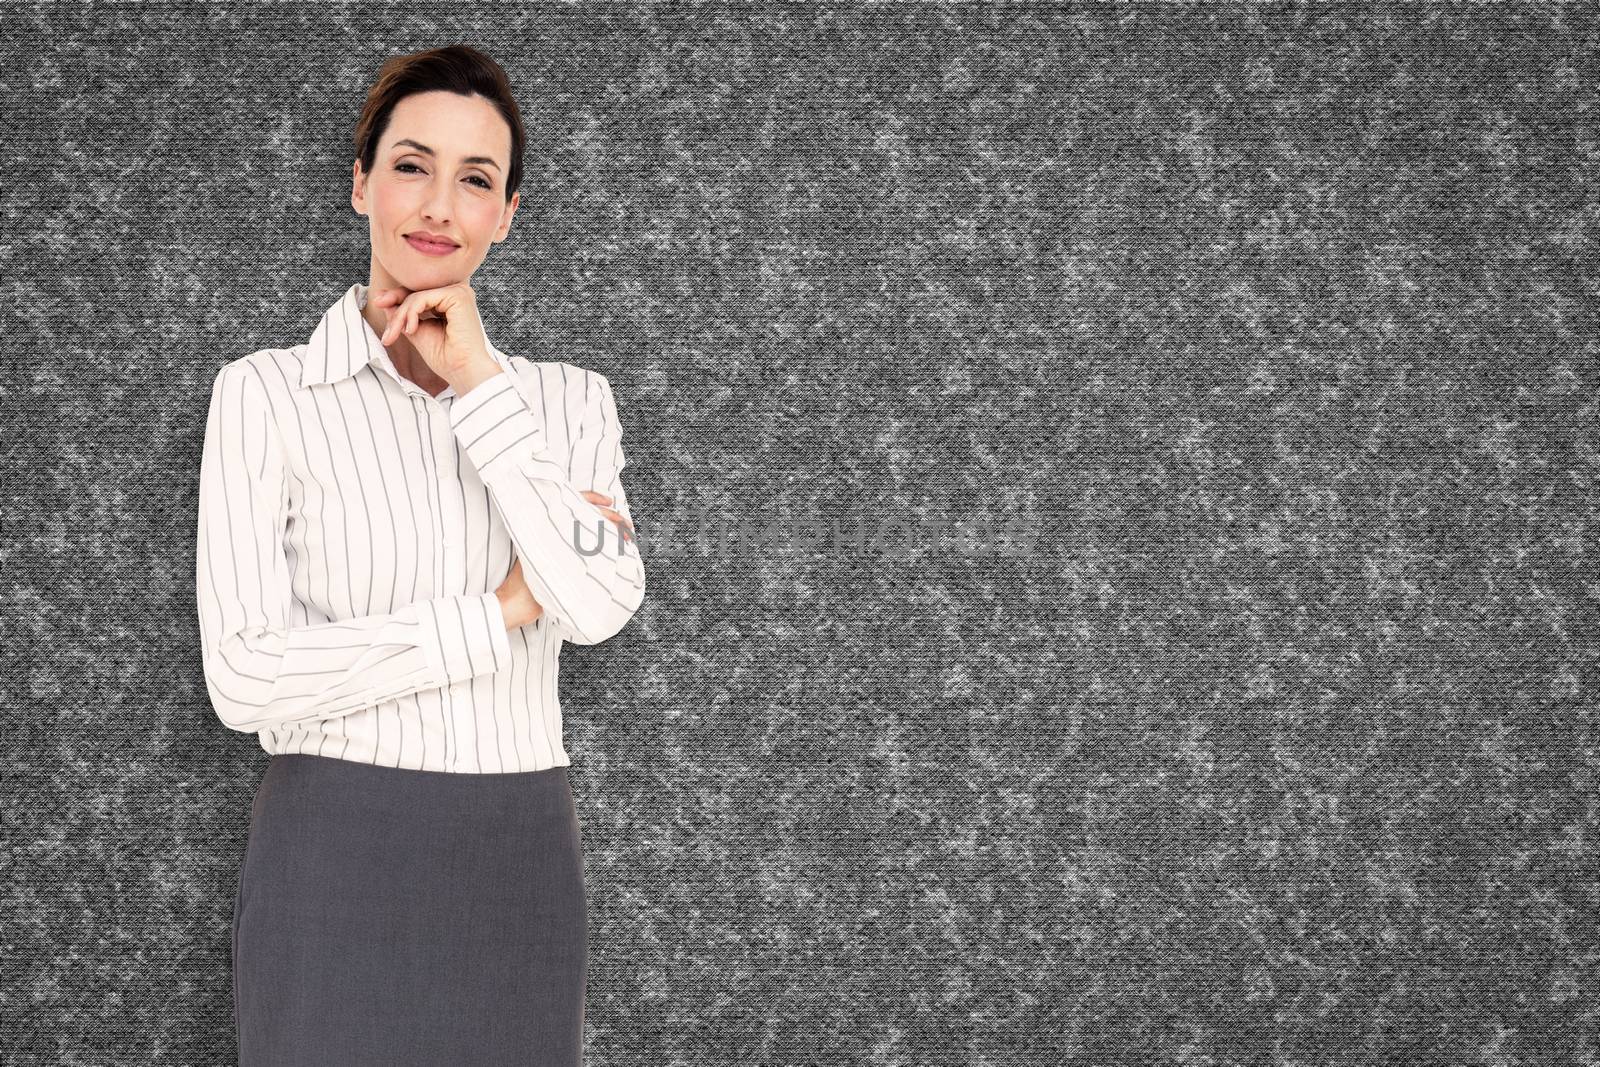 Smiling businesswoman against grey background